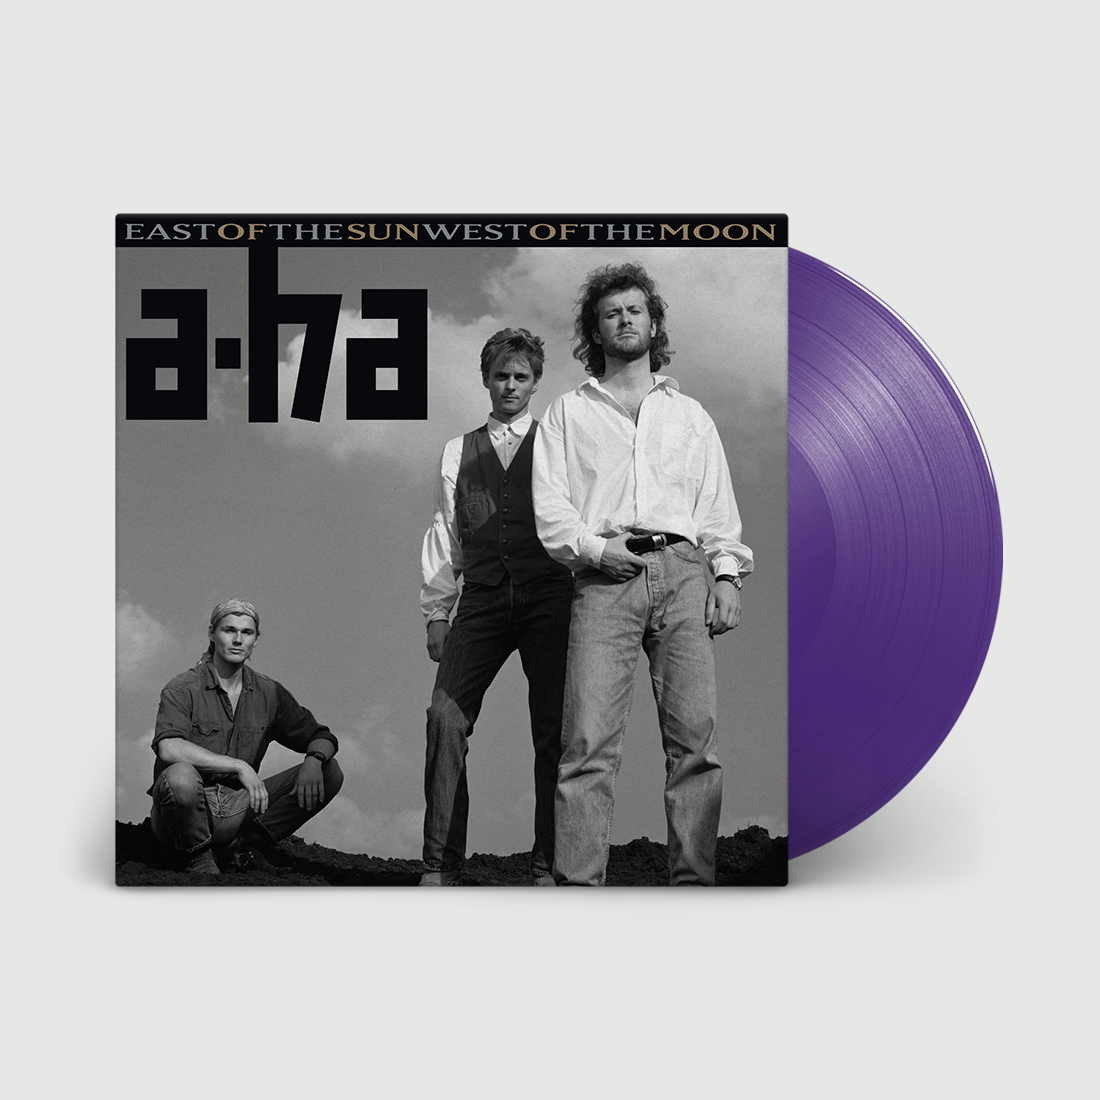 A-HA – East of the Sun West of the Moon – LP – Limited Purple Vinyl [NAD-OCT10]